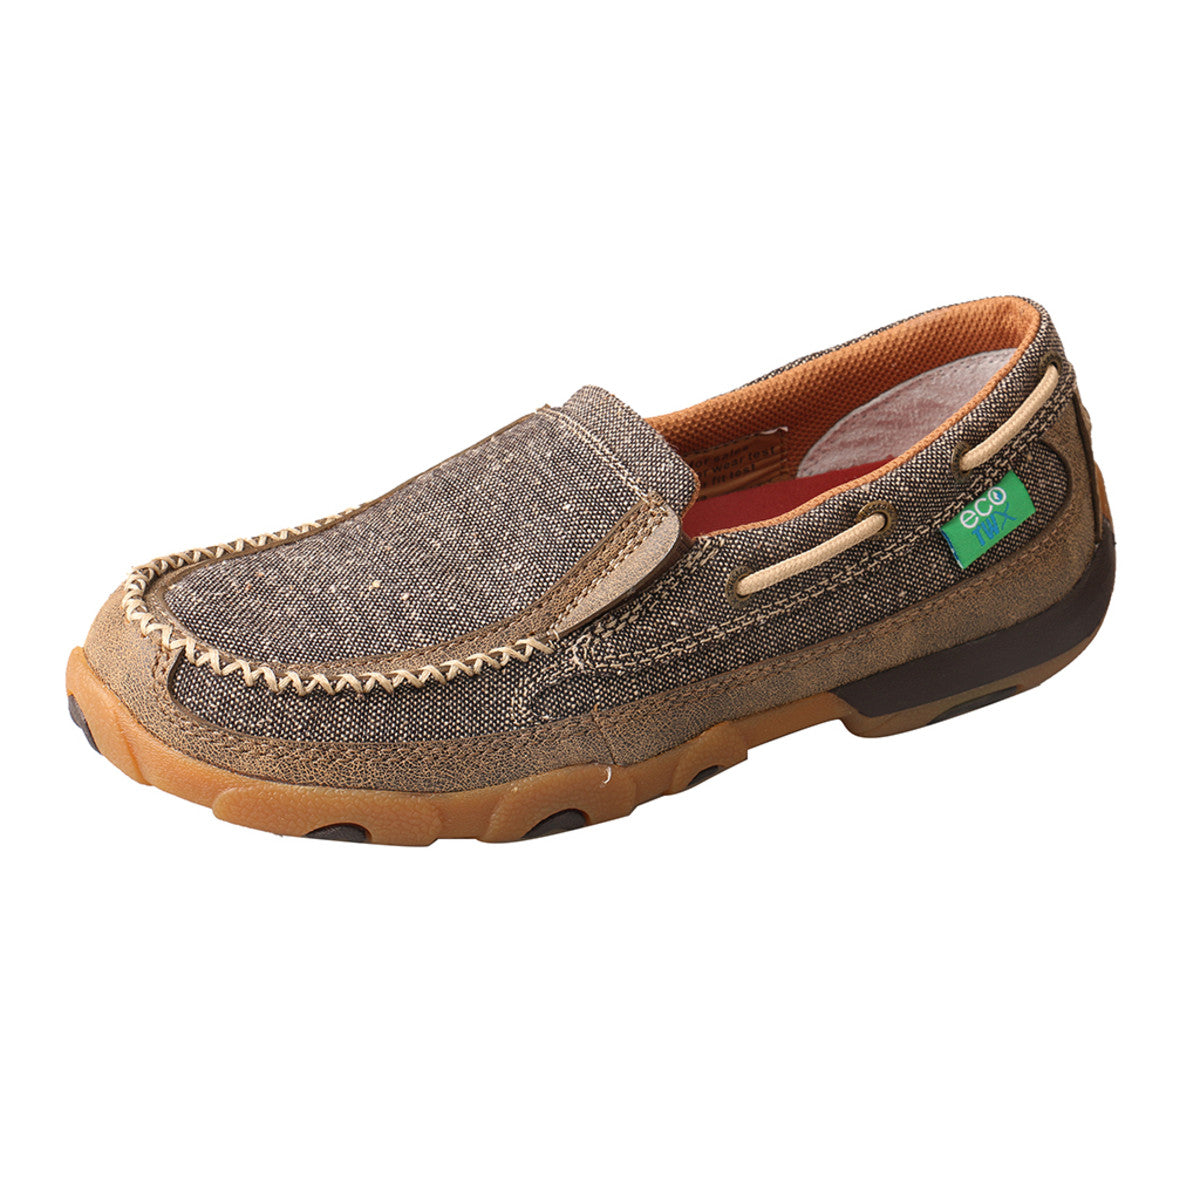 Women's Twisted X Slip-On Driving Moccasins Shoe in Dust from the side view